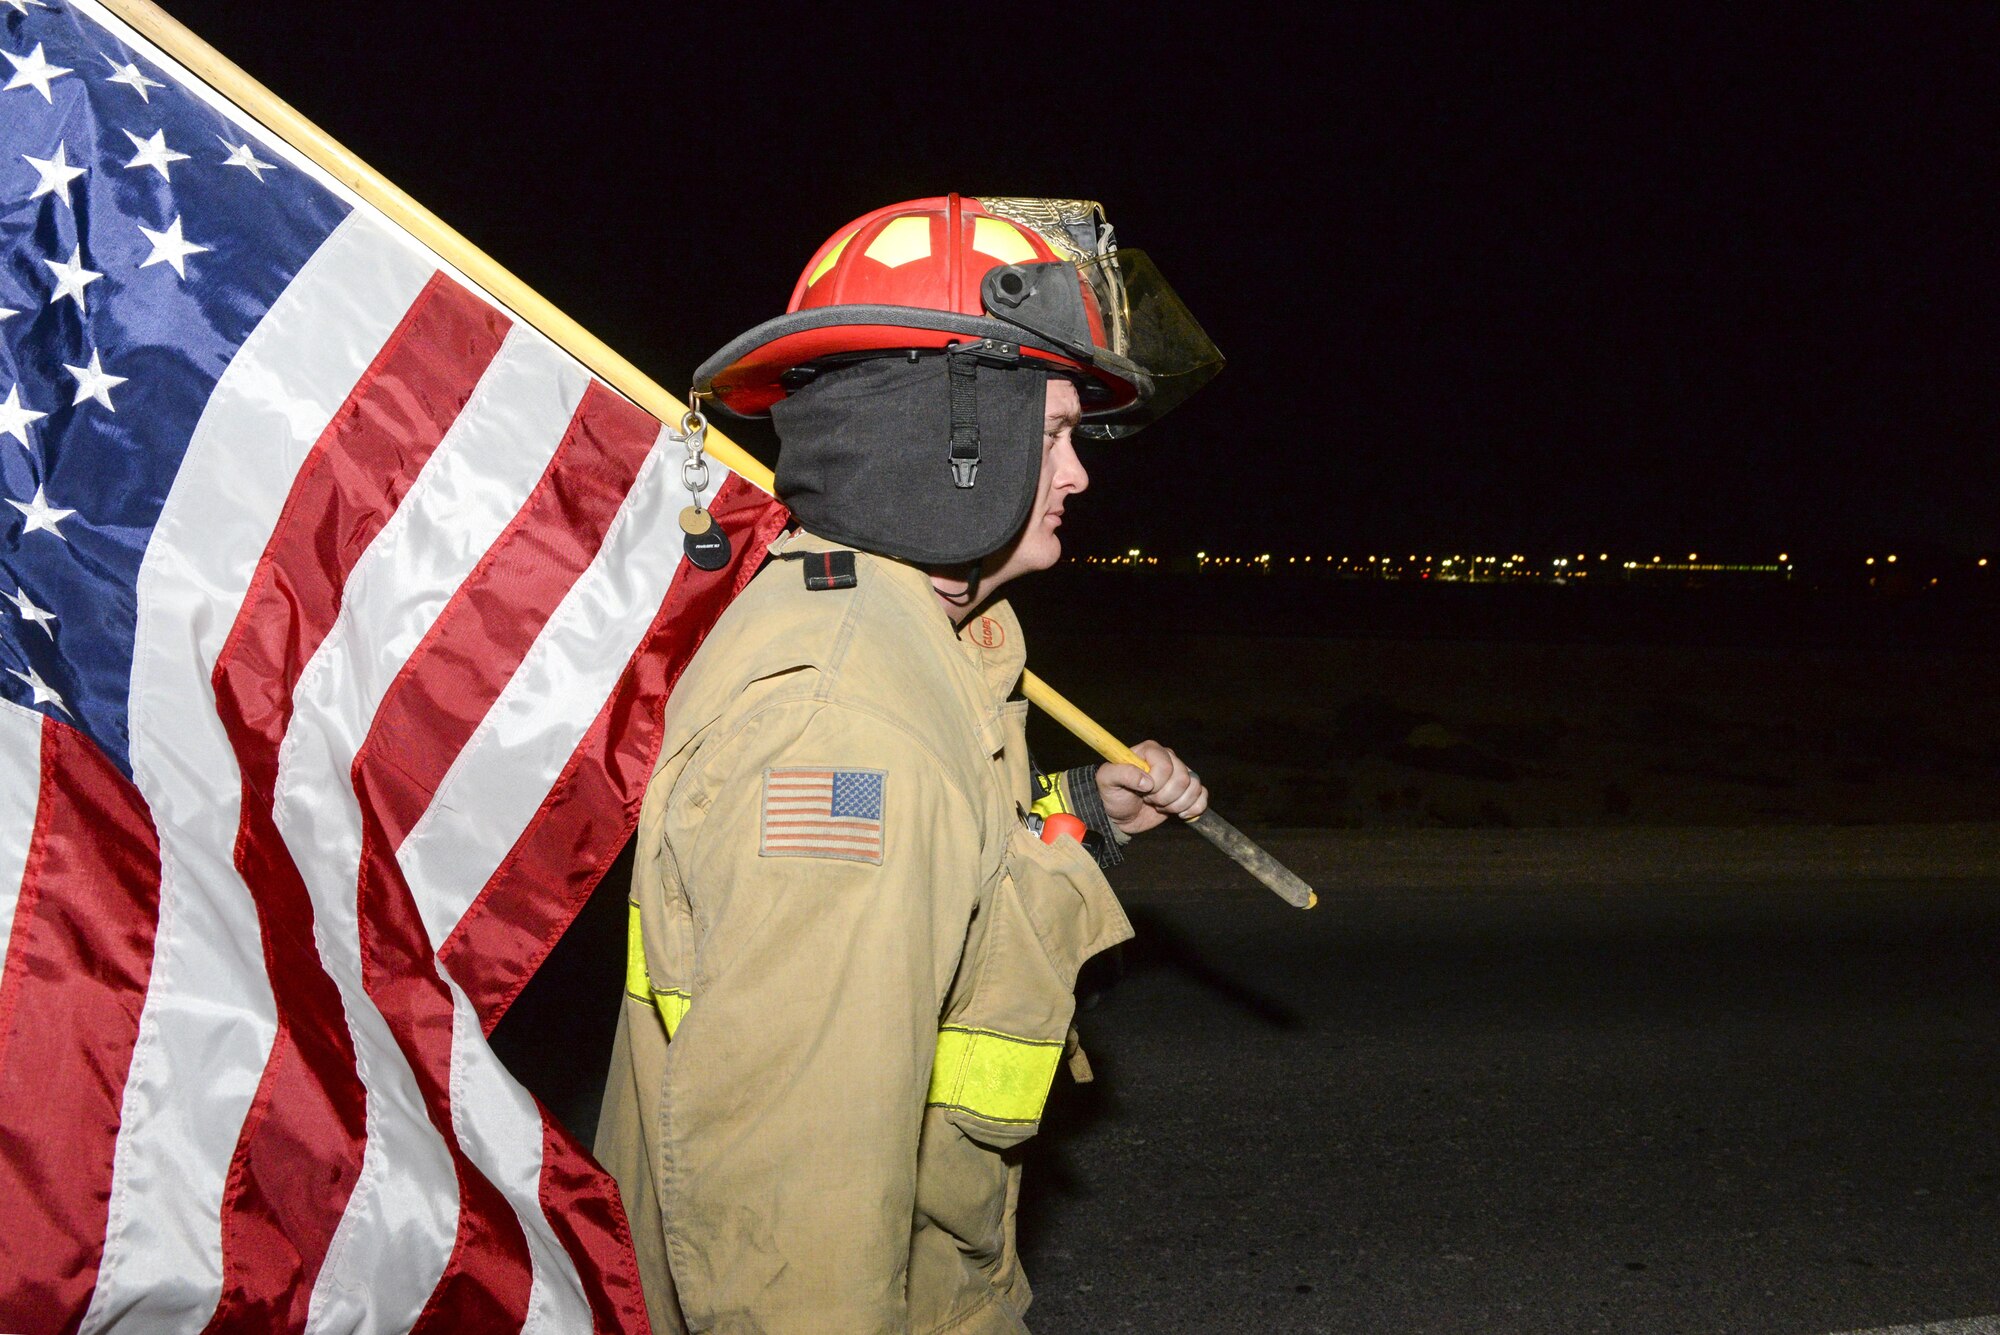 U.S. Air Force Staff Sgt. Austin Aldrich, firefighter assigned to the 379th Expeditionary Civil Engineering Squadron, caries a U.S. flag during an evening 9/11 memorial walk at Al Udeid Air Base, Qatar, Sept. 11, 2017.